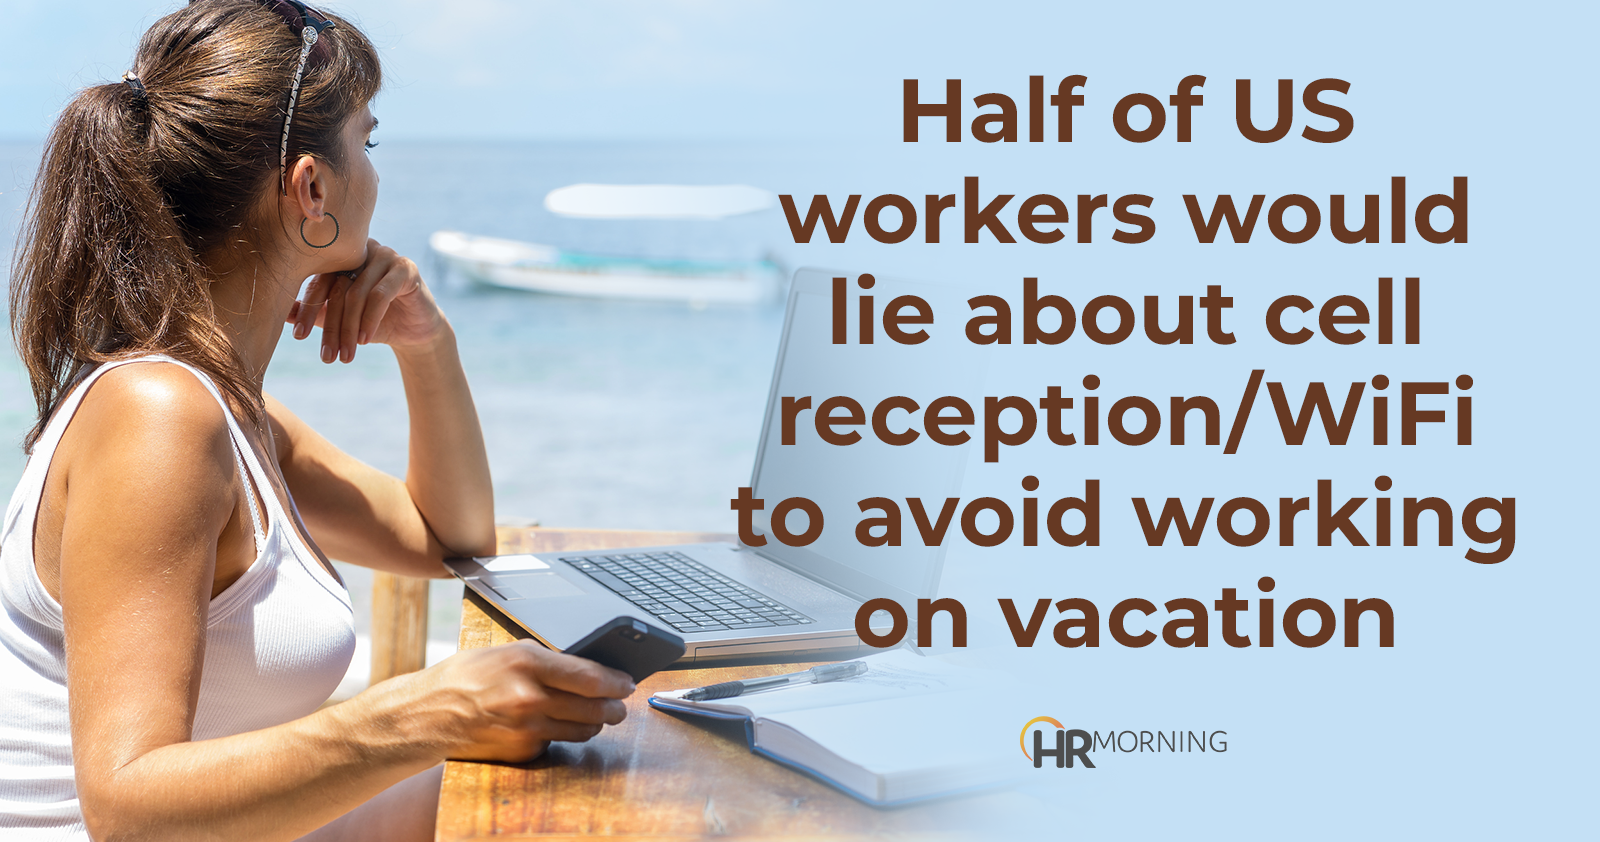 Half of US workers would lie about cell reception/WiFi to avoid working on vacation